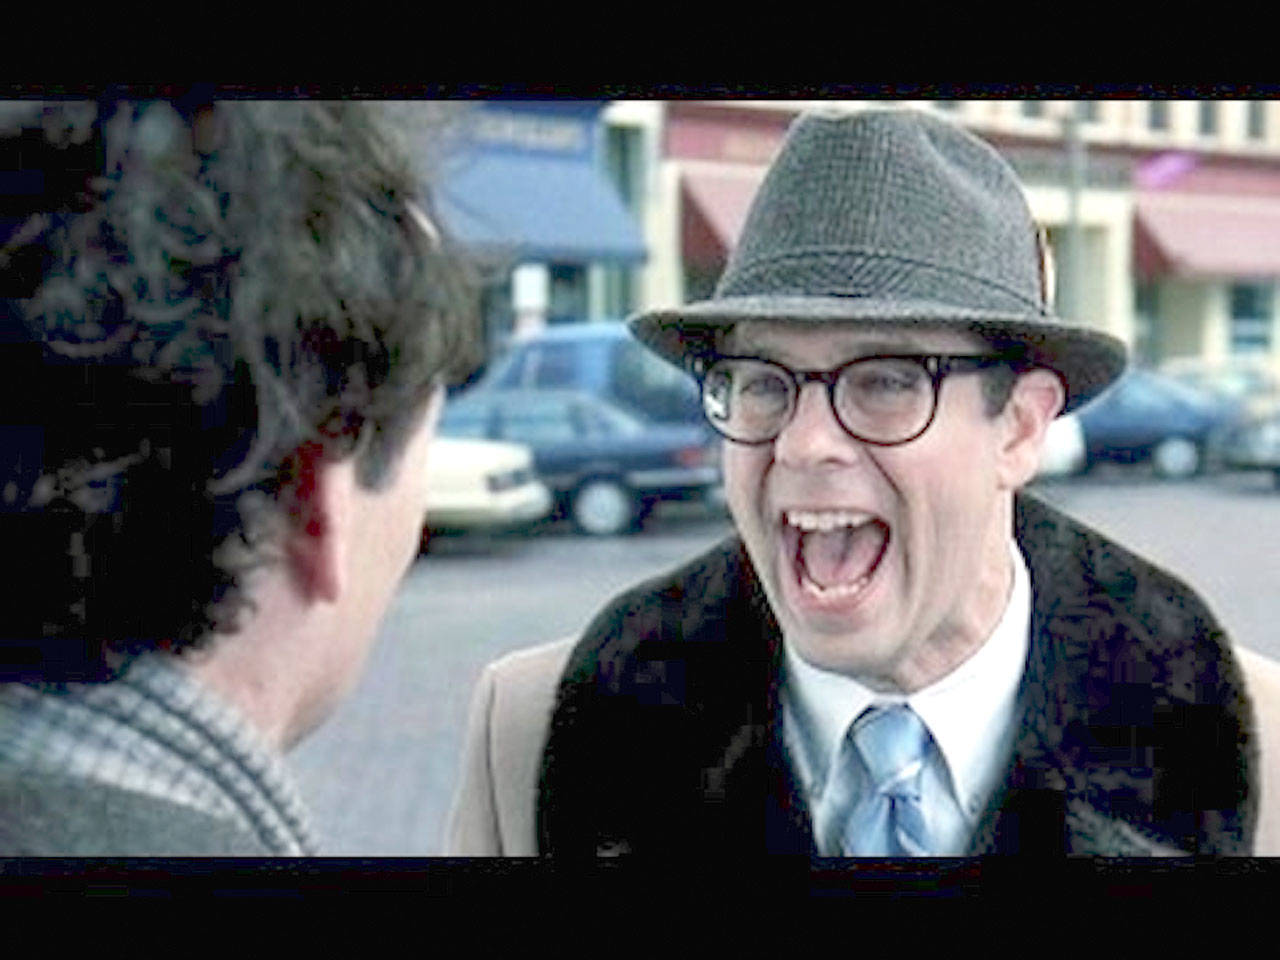 Stephen Tobolowsky’s depiction of Ned Ryerson in “Groundhog Day” has inspired a look-alike contest at the Port Townsend Film Festival this weekend. Tobolowsky will be on hand at an outdoor screening of his 1993 movie Saturday night.